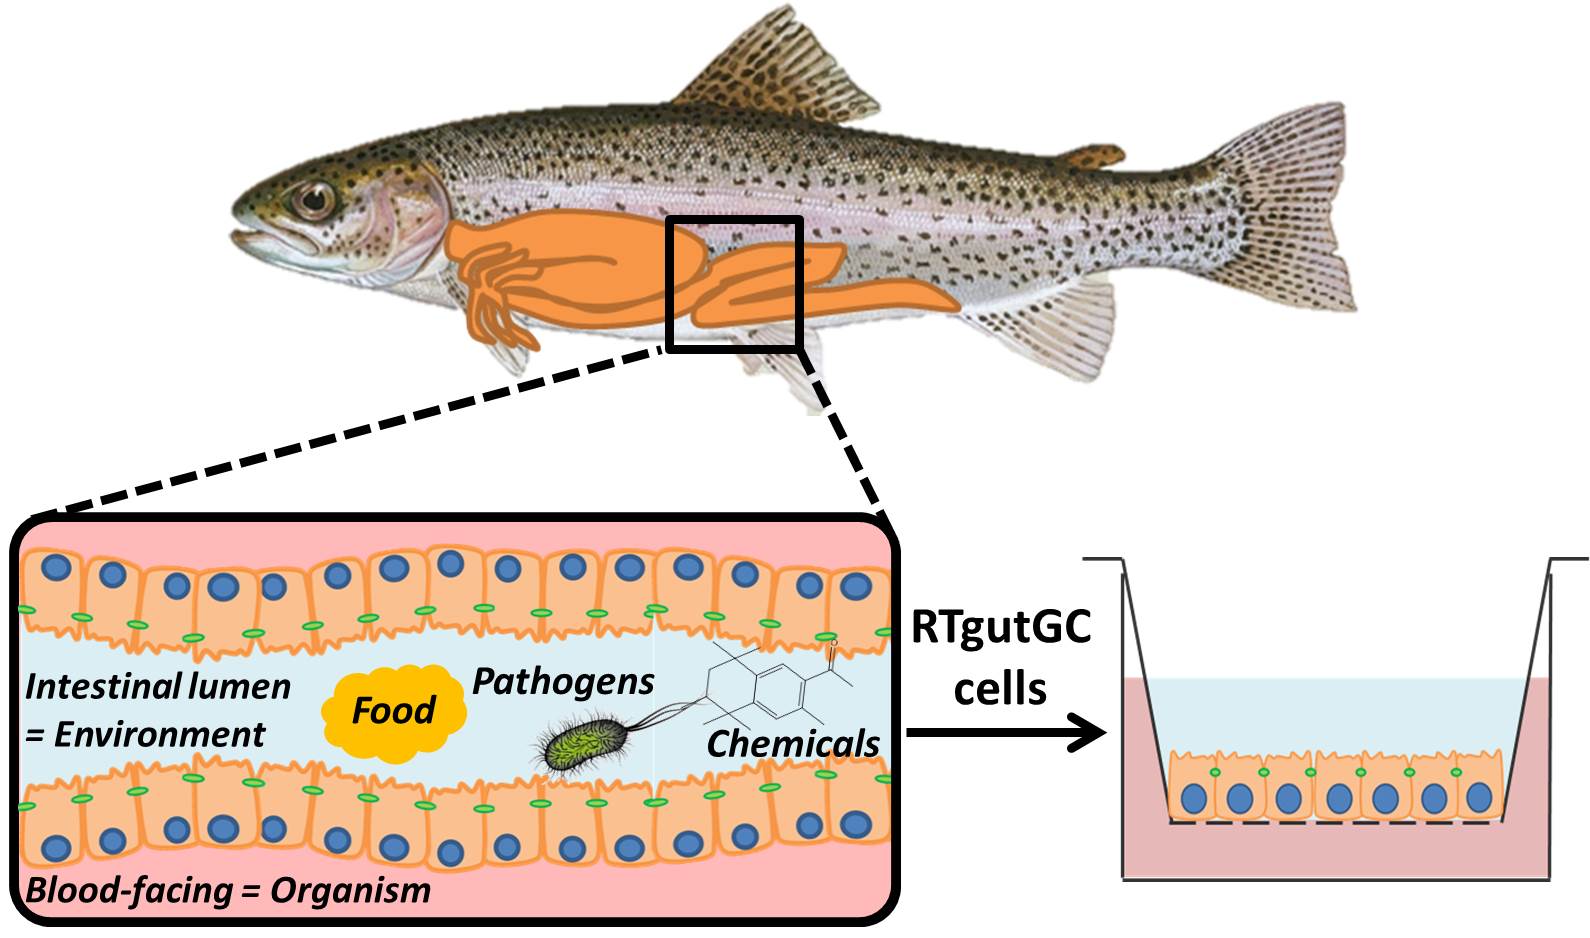 phd-thesis-a-fish-intestinal-barrier-model-to-assess-interaction-with-chemicals-in-vitro